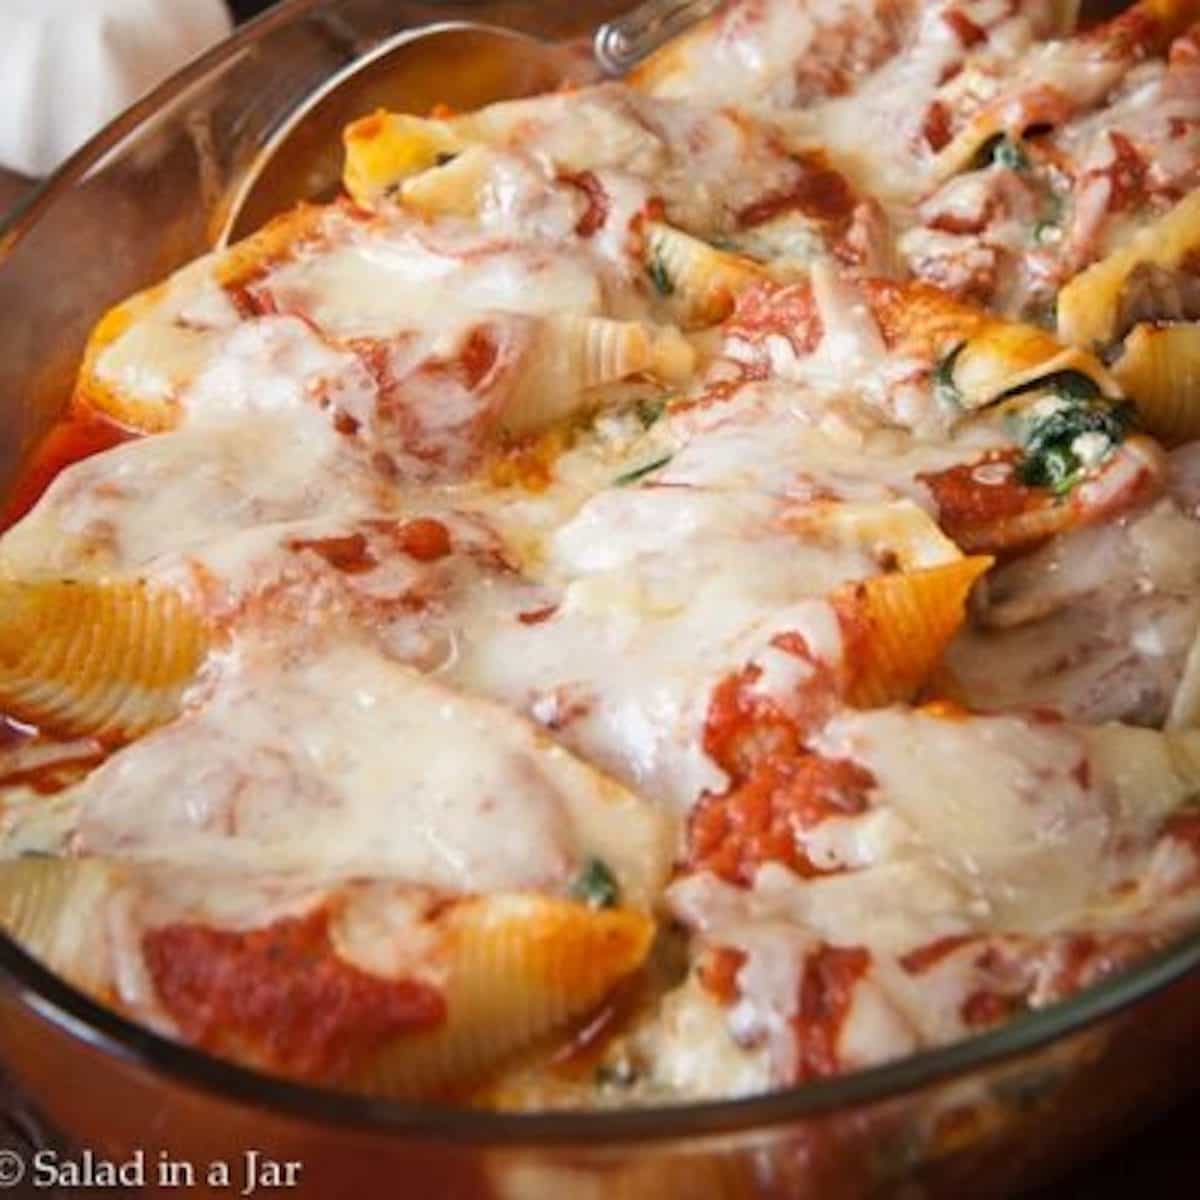 cheesy spinach and mushroom stuffed shells in a serving dish ready to eat.